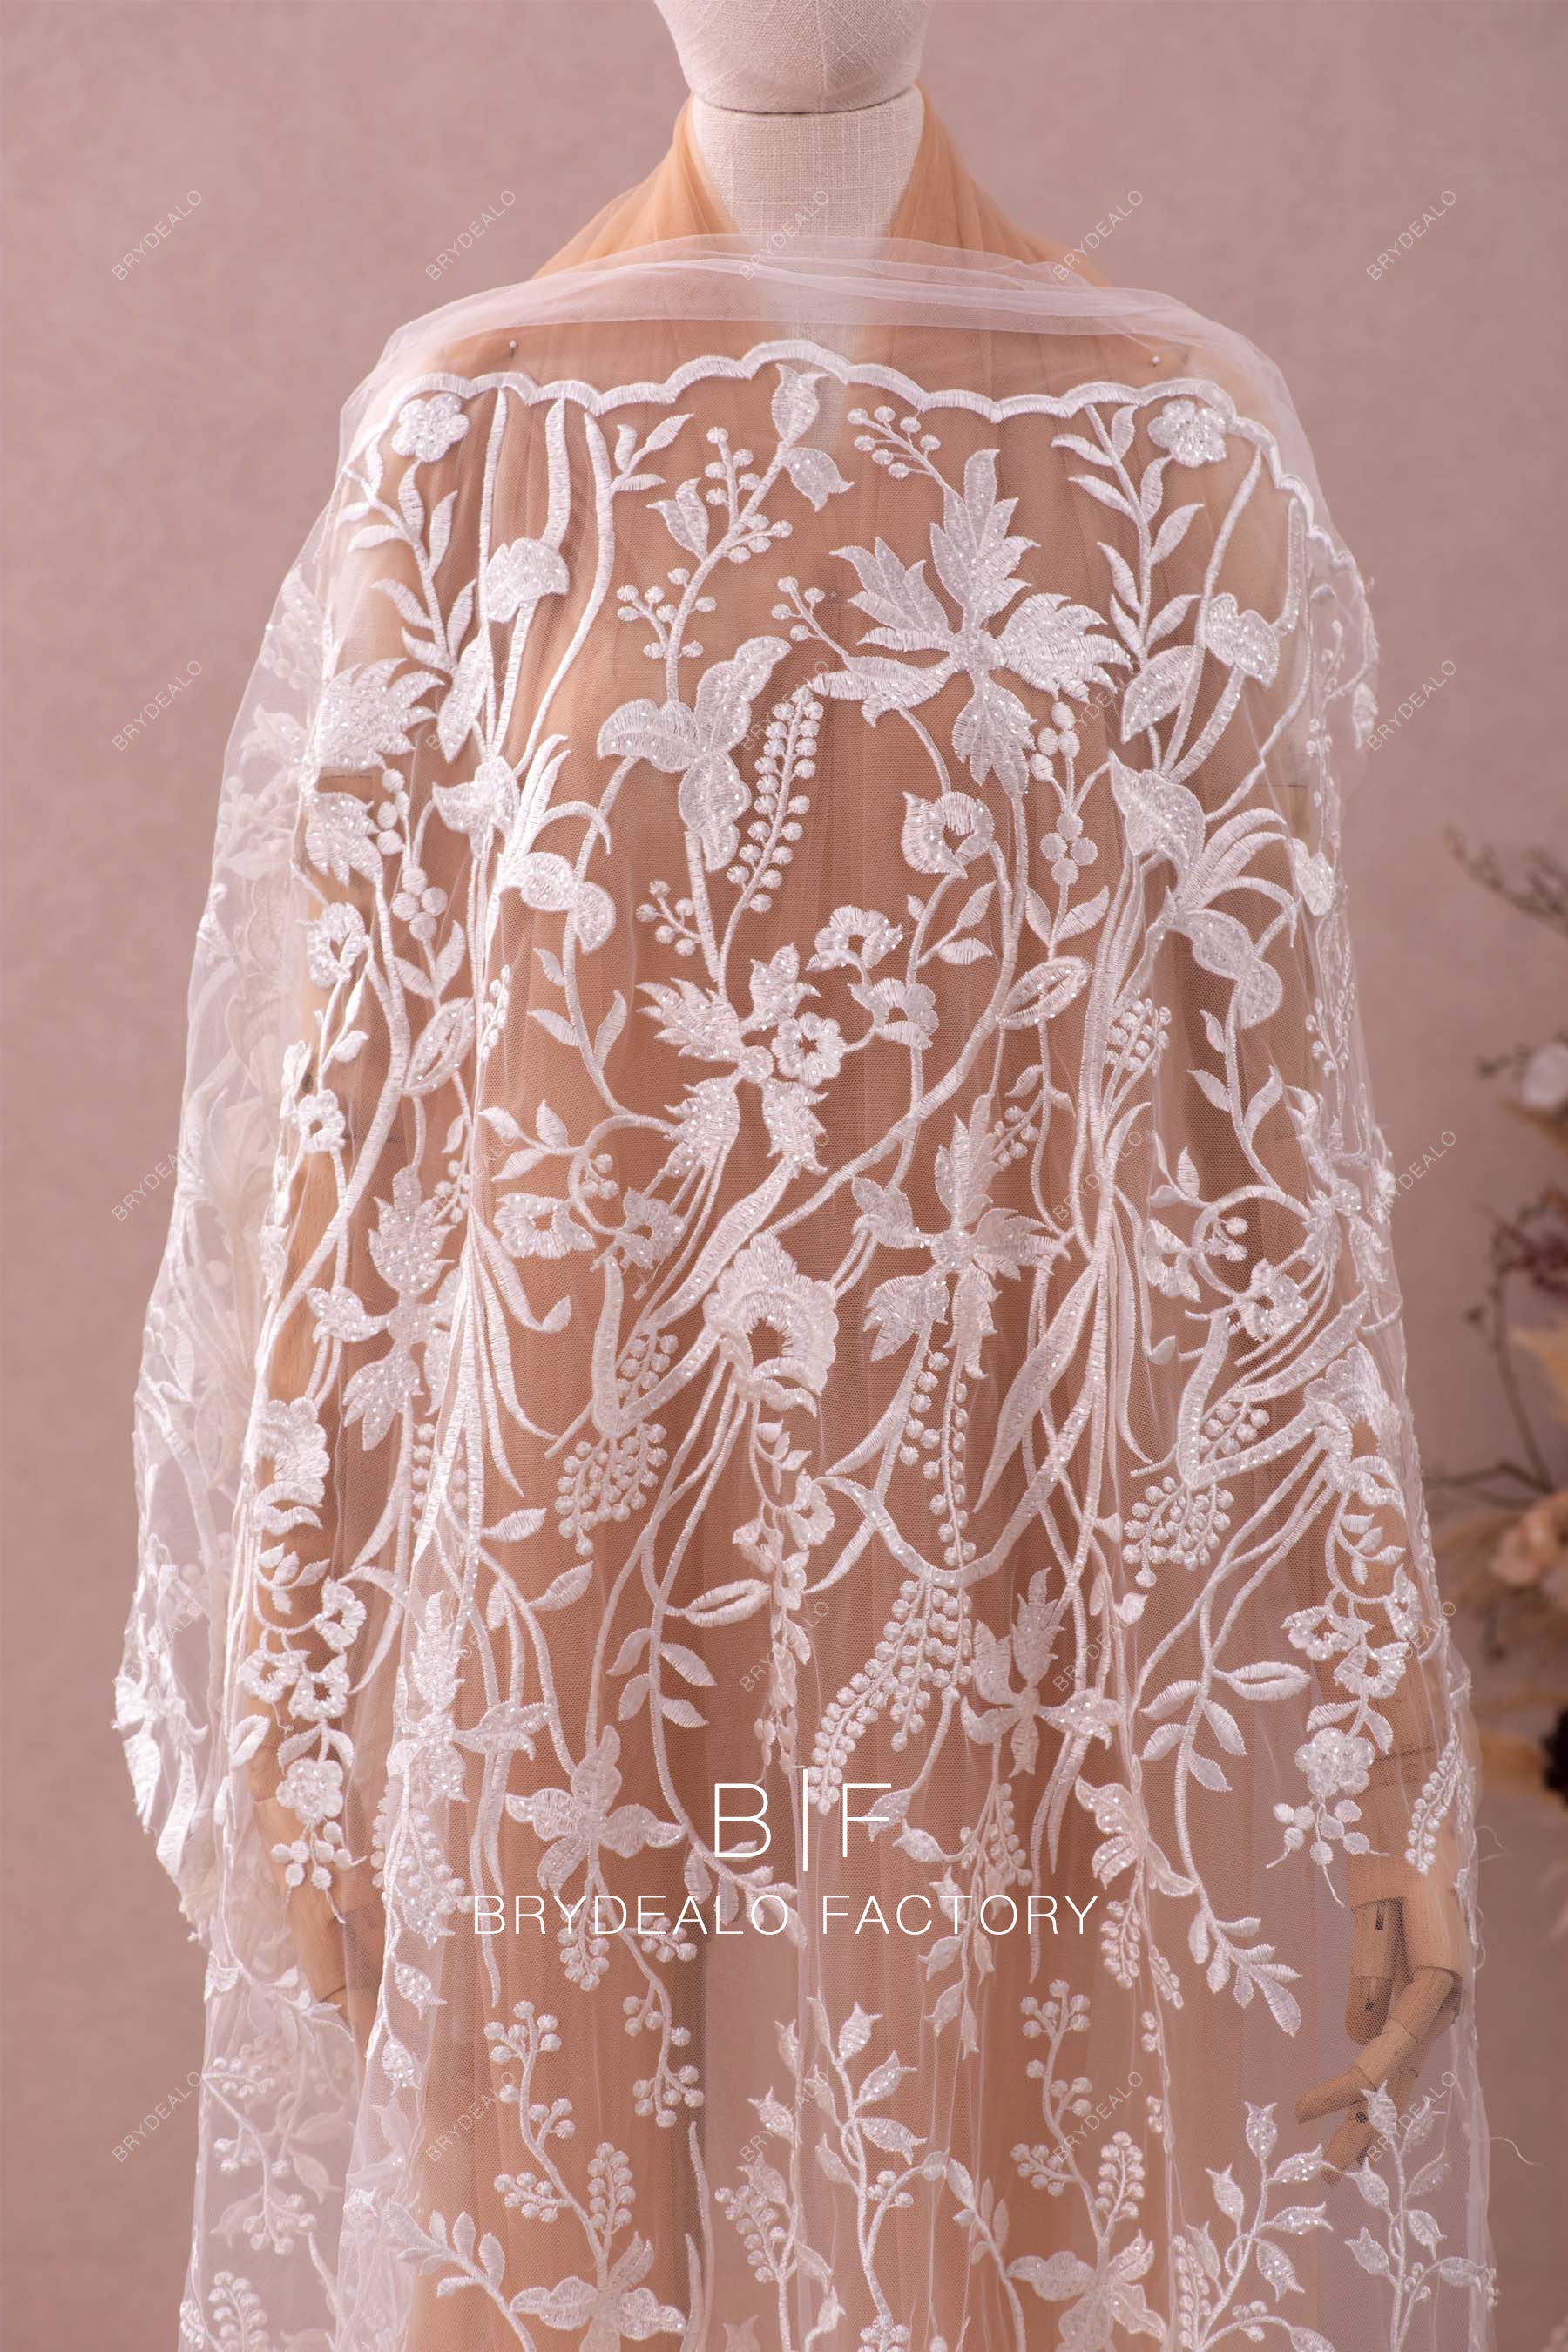 Wholesale Floristic Sheer Sequin Embroidery Lace Fabric